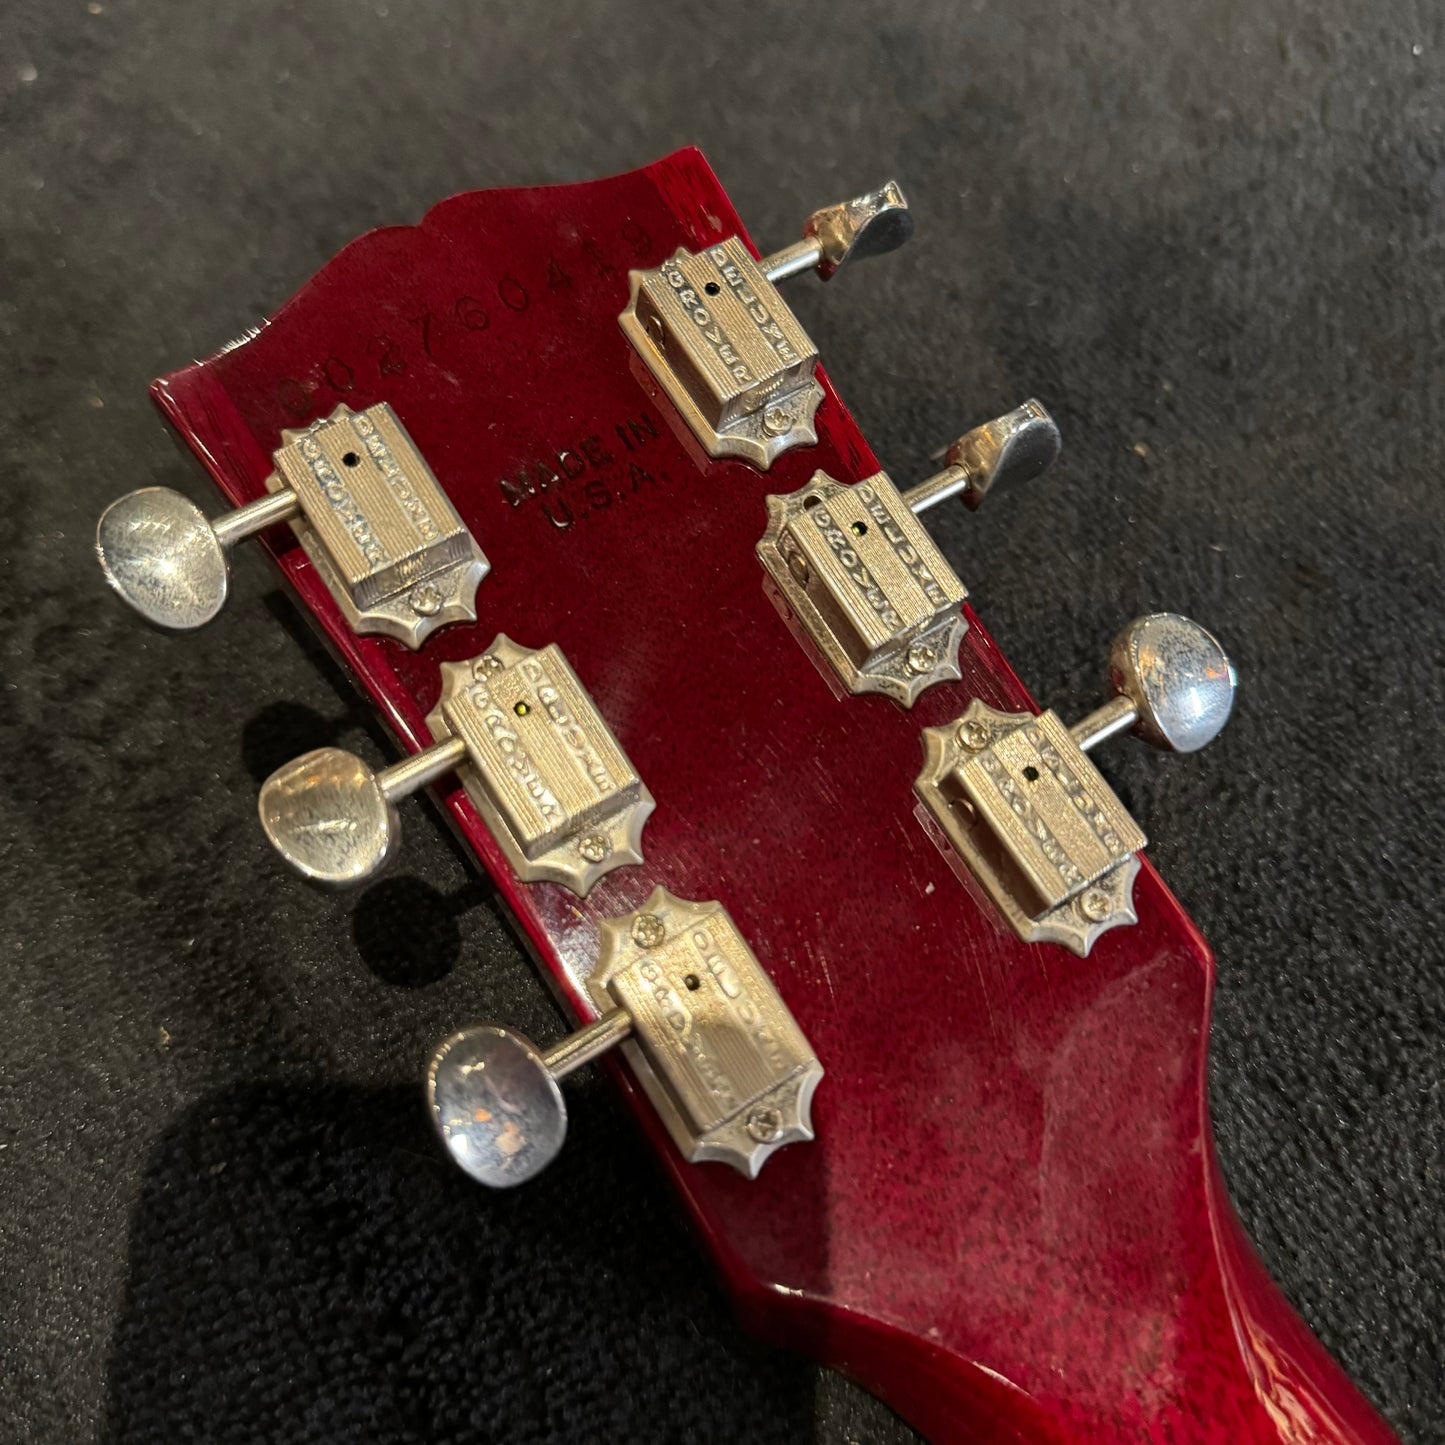 Gibson SG Junior in Cherry Red 2007